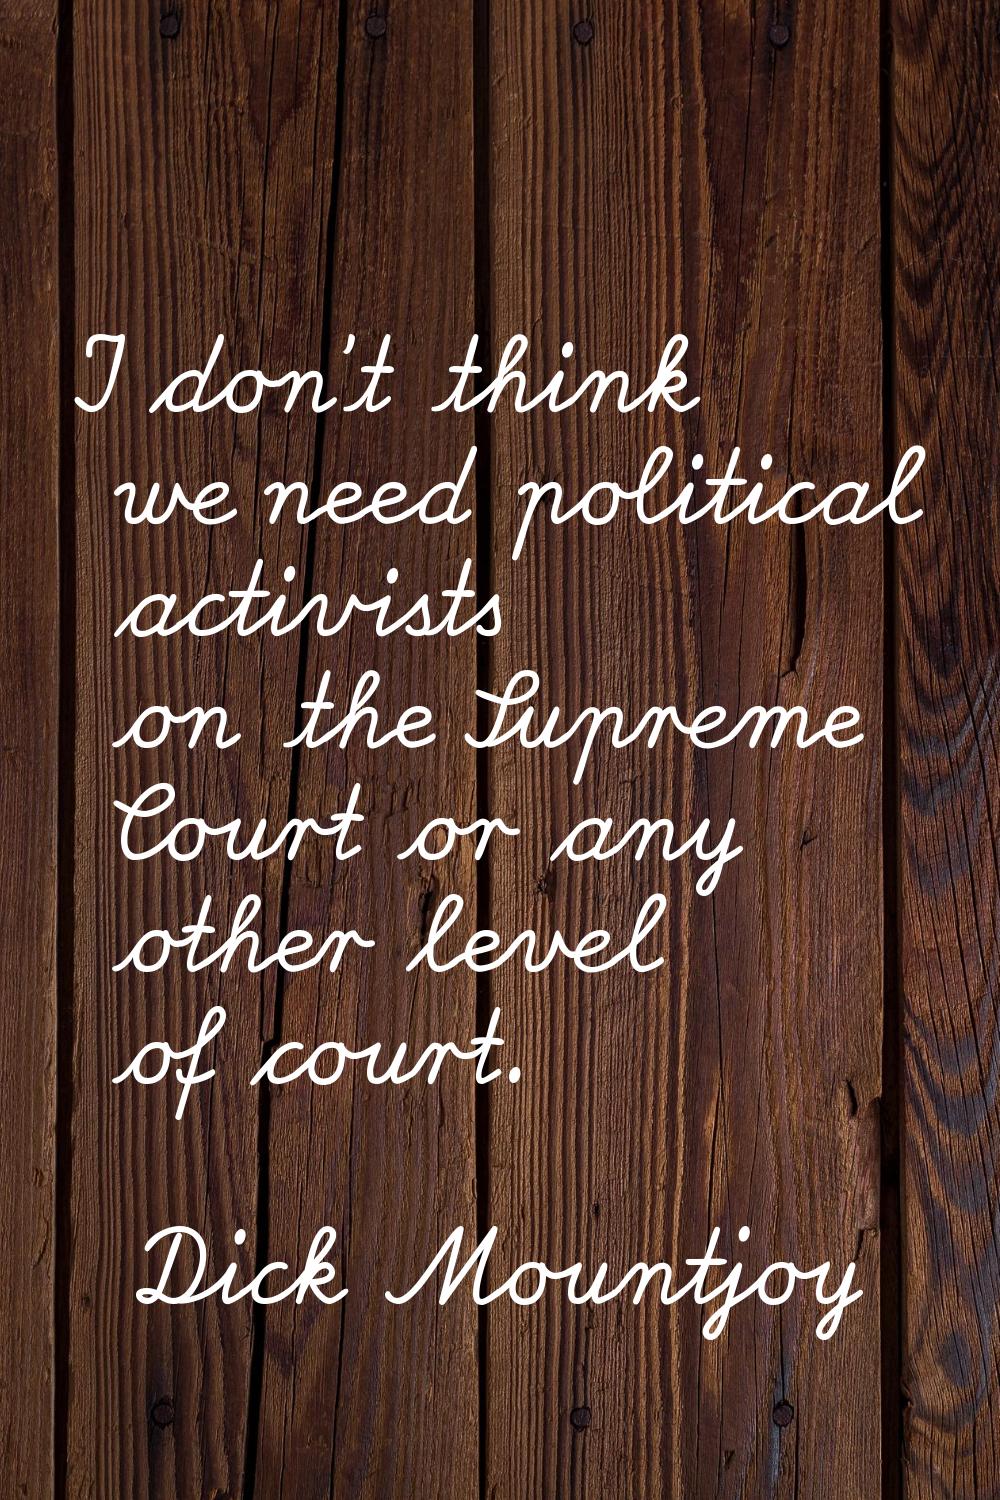 I don't think we need political activists on the Supreme Court or any other level of court.